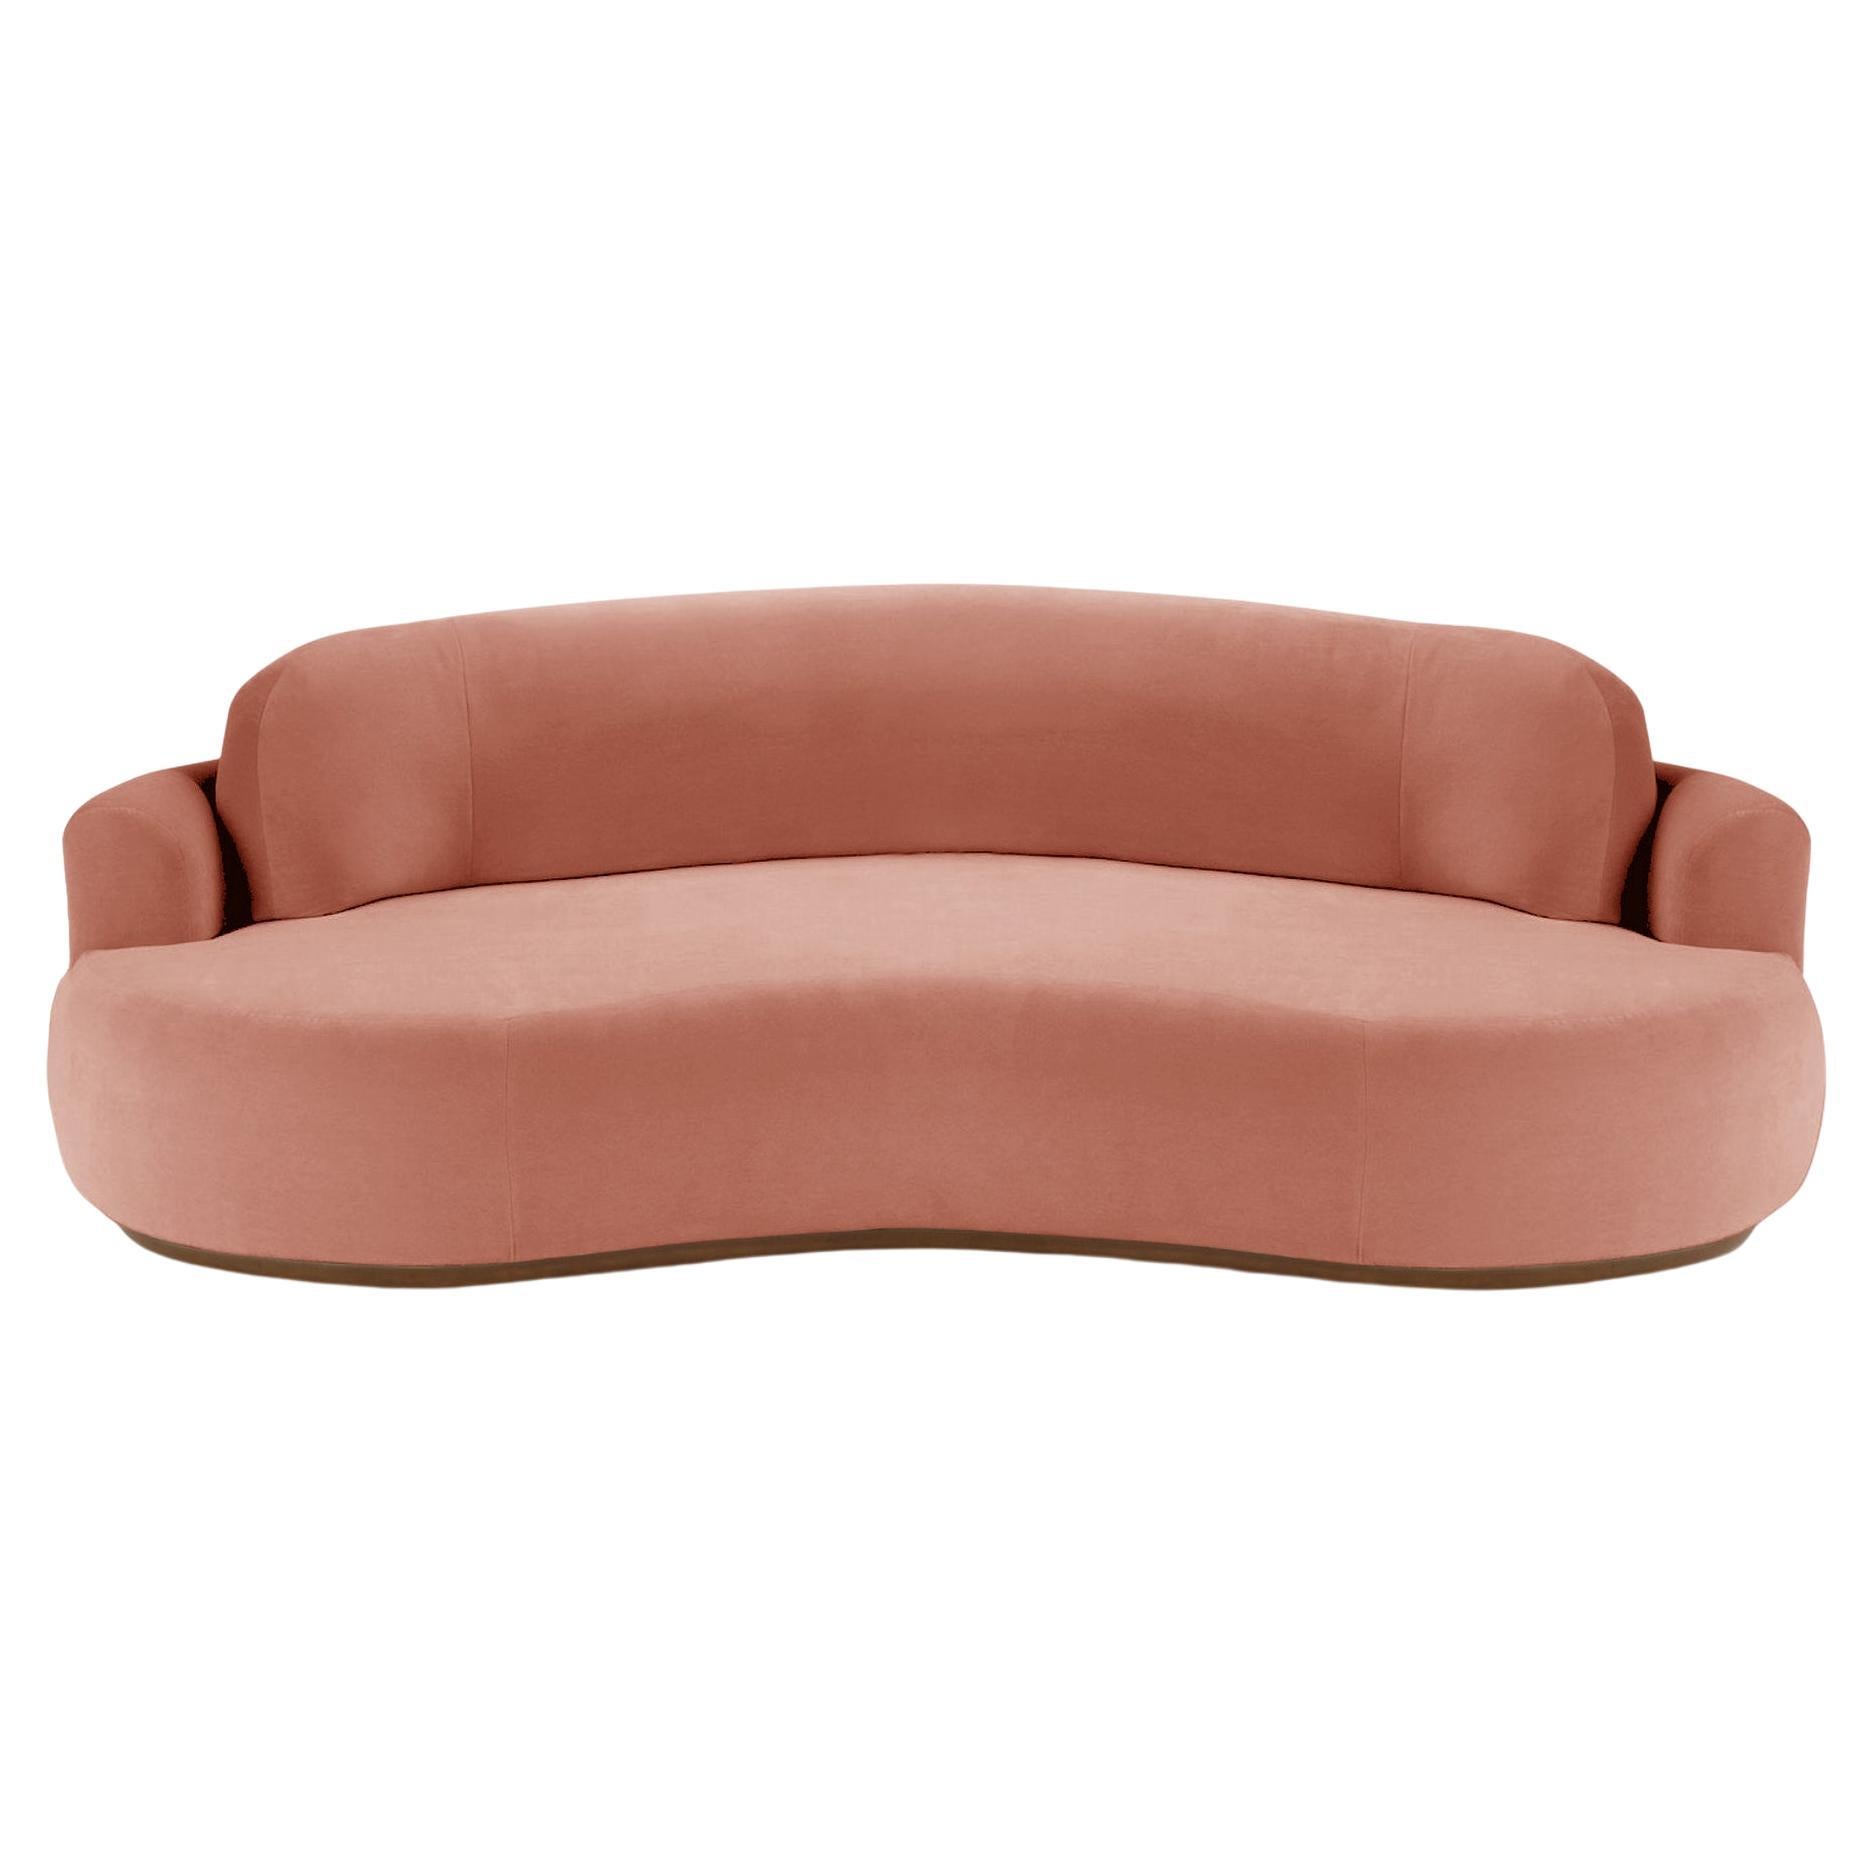 Naked Curved Sofa, Large with Beech Ash-056-1 and Paris Brick For Sale